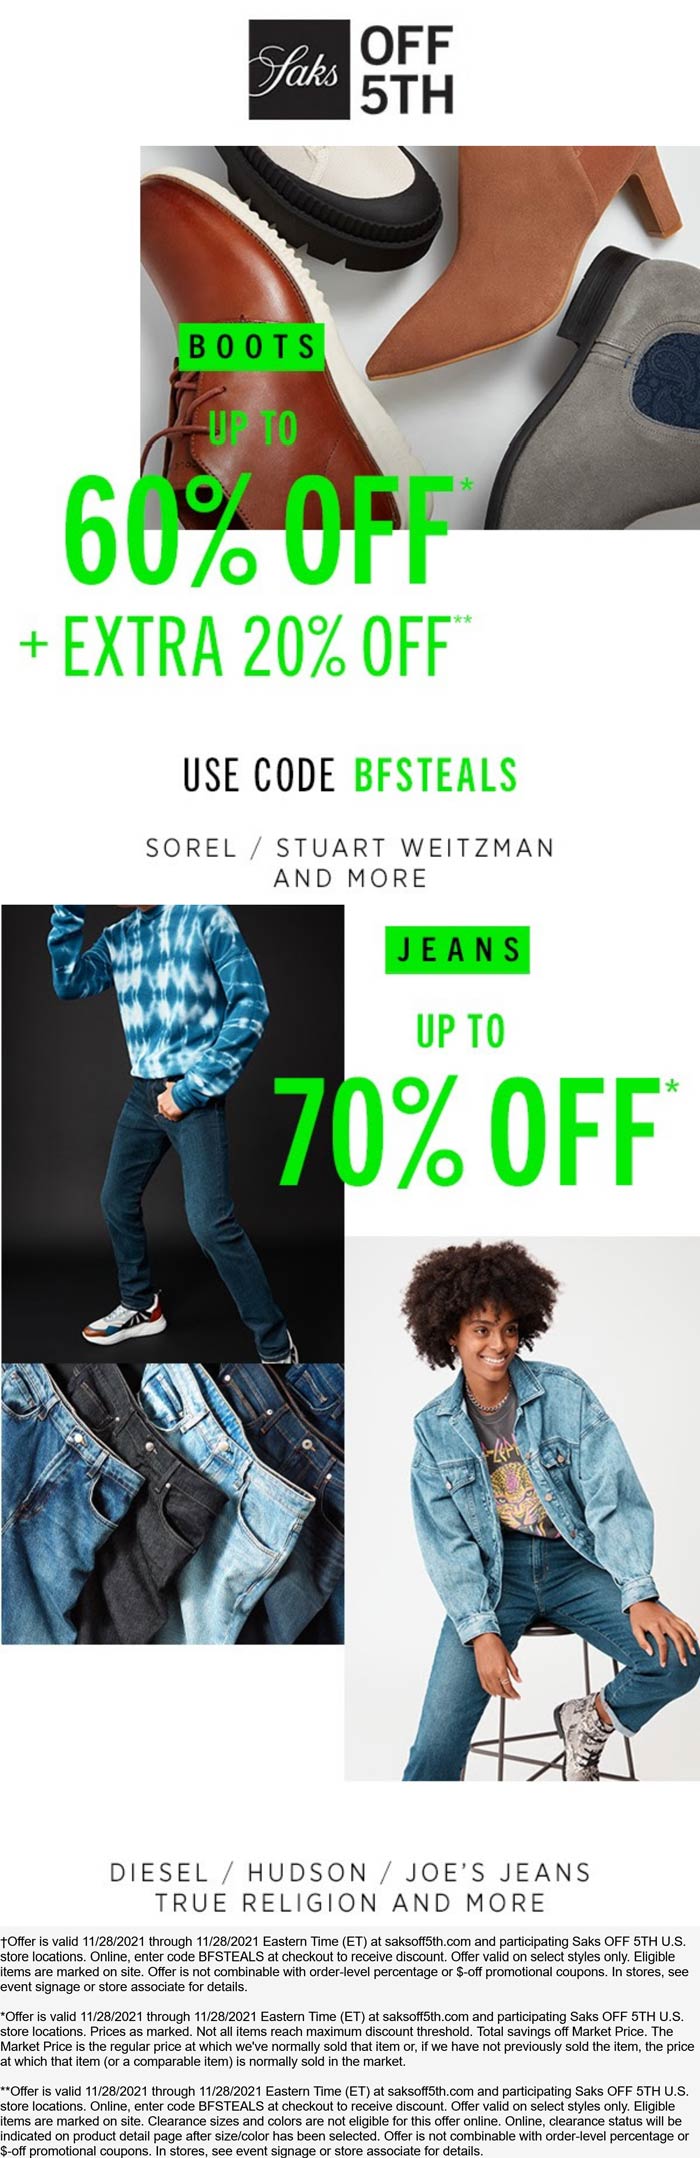 OFF 5TH stores Coupon  Extra 20% off boots & more today at Saks OFF 5TH via promo code BFSTEALS #off5th 